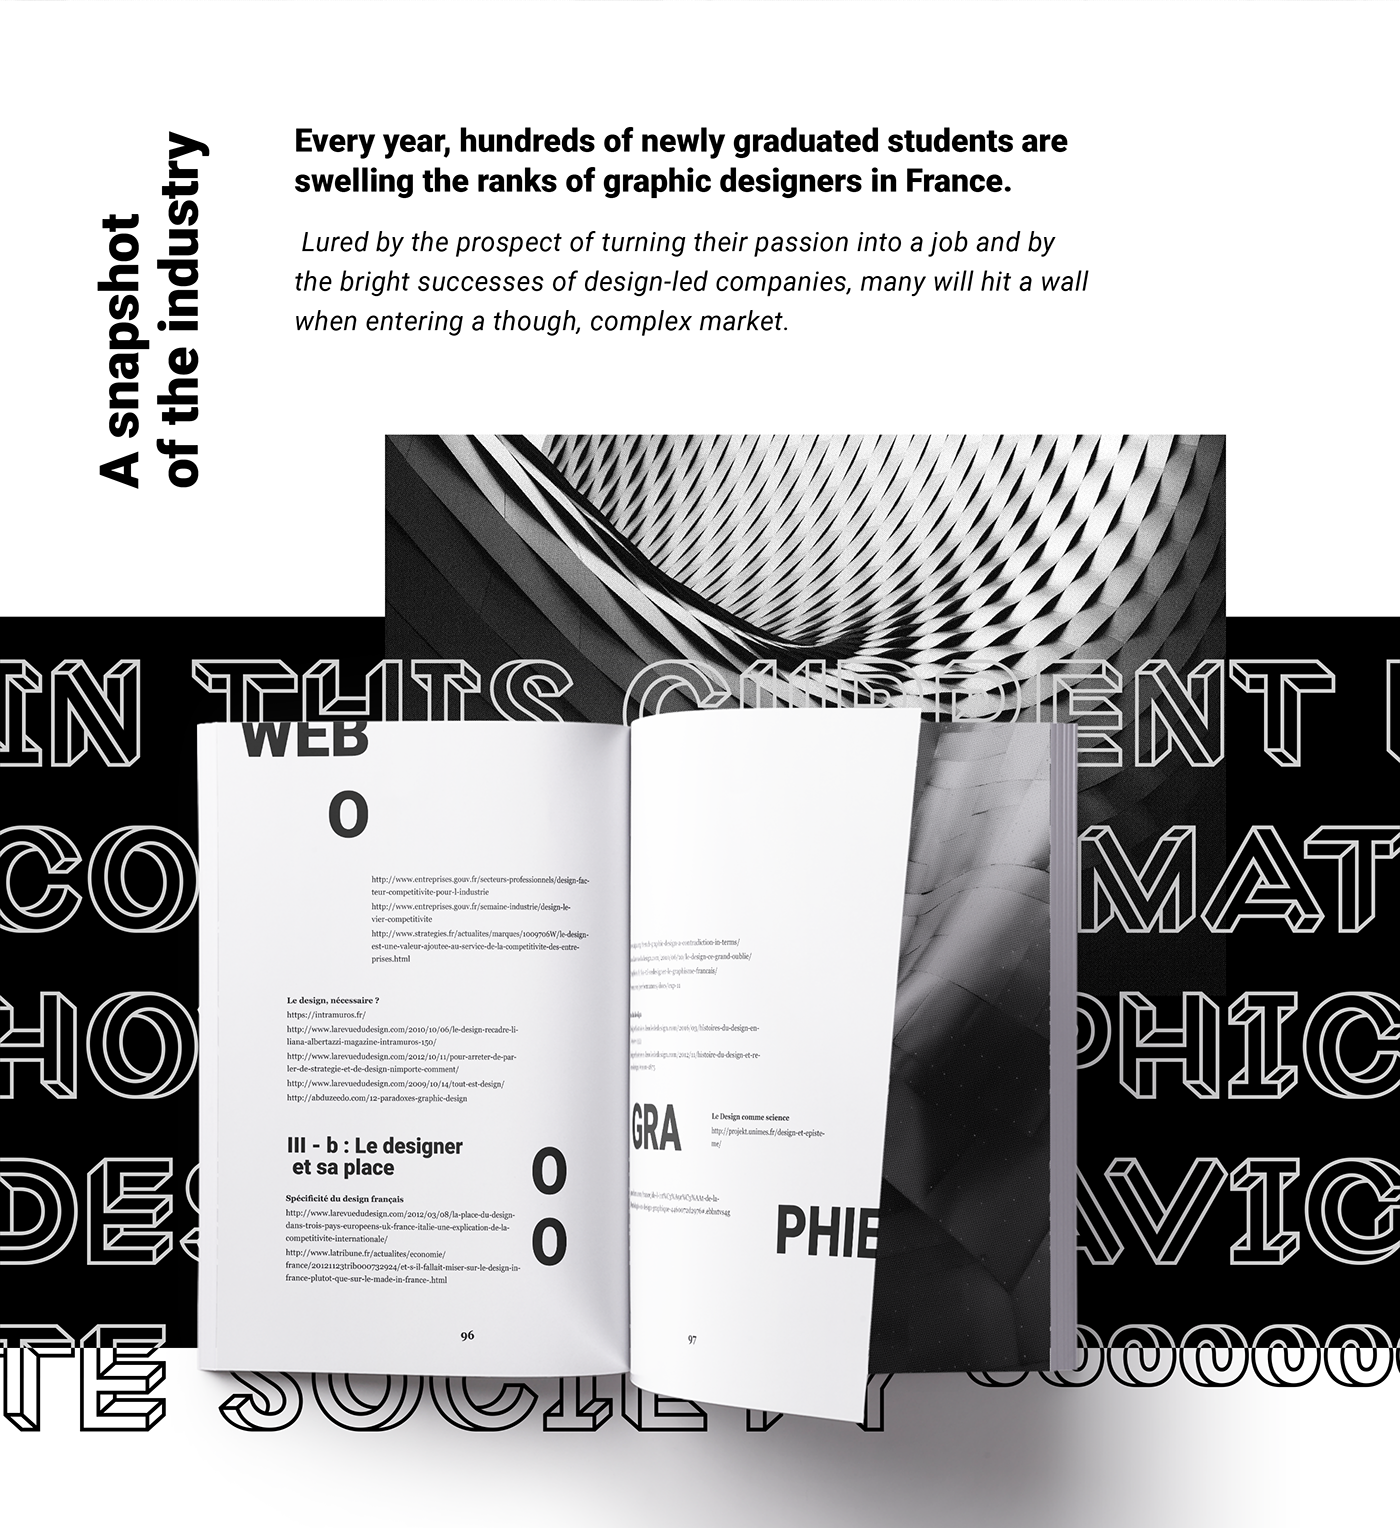 print editorial black and white thesis Minimalism essay graphic designers france